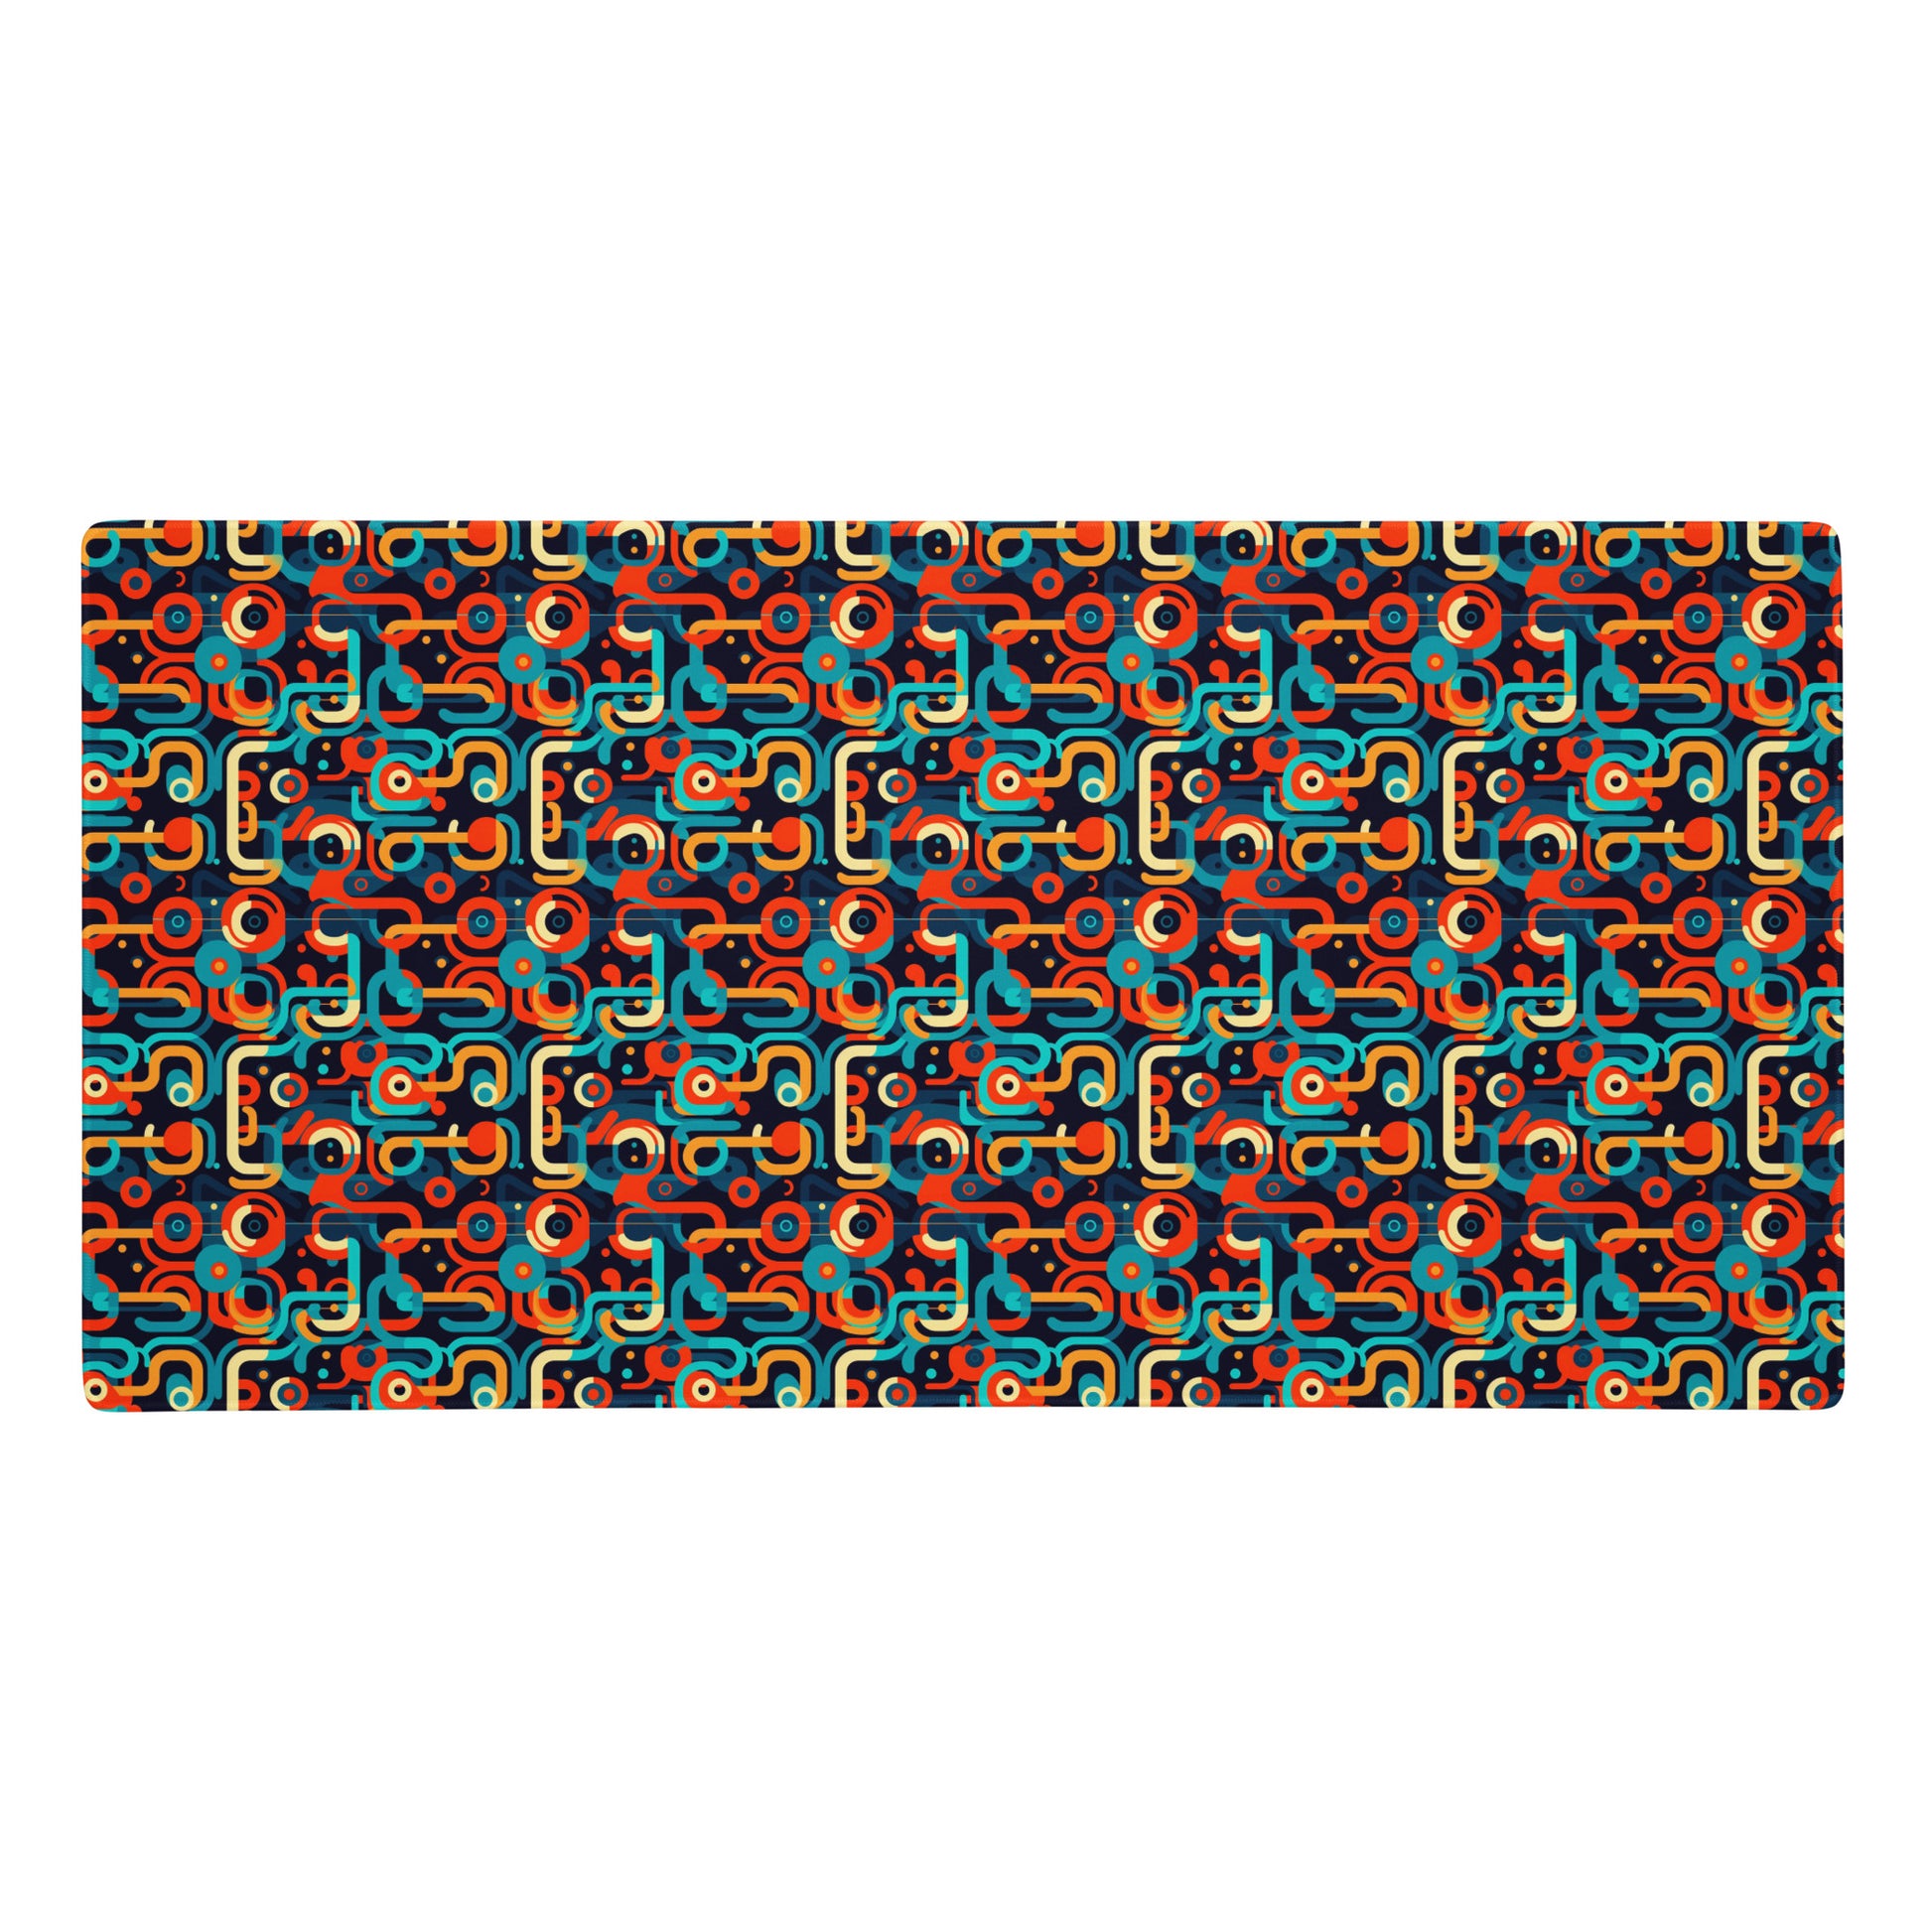 A 36" x 18" gaming desk pad with blue, orange, and beige lines on a black background.